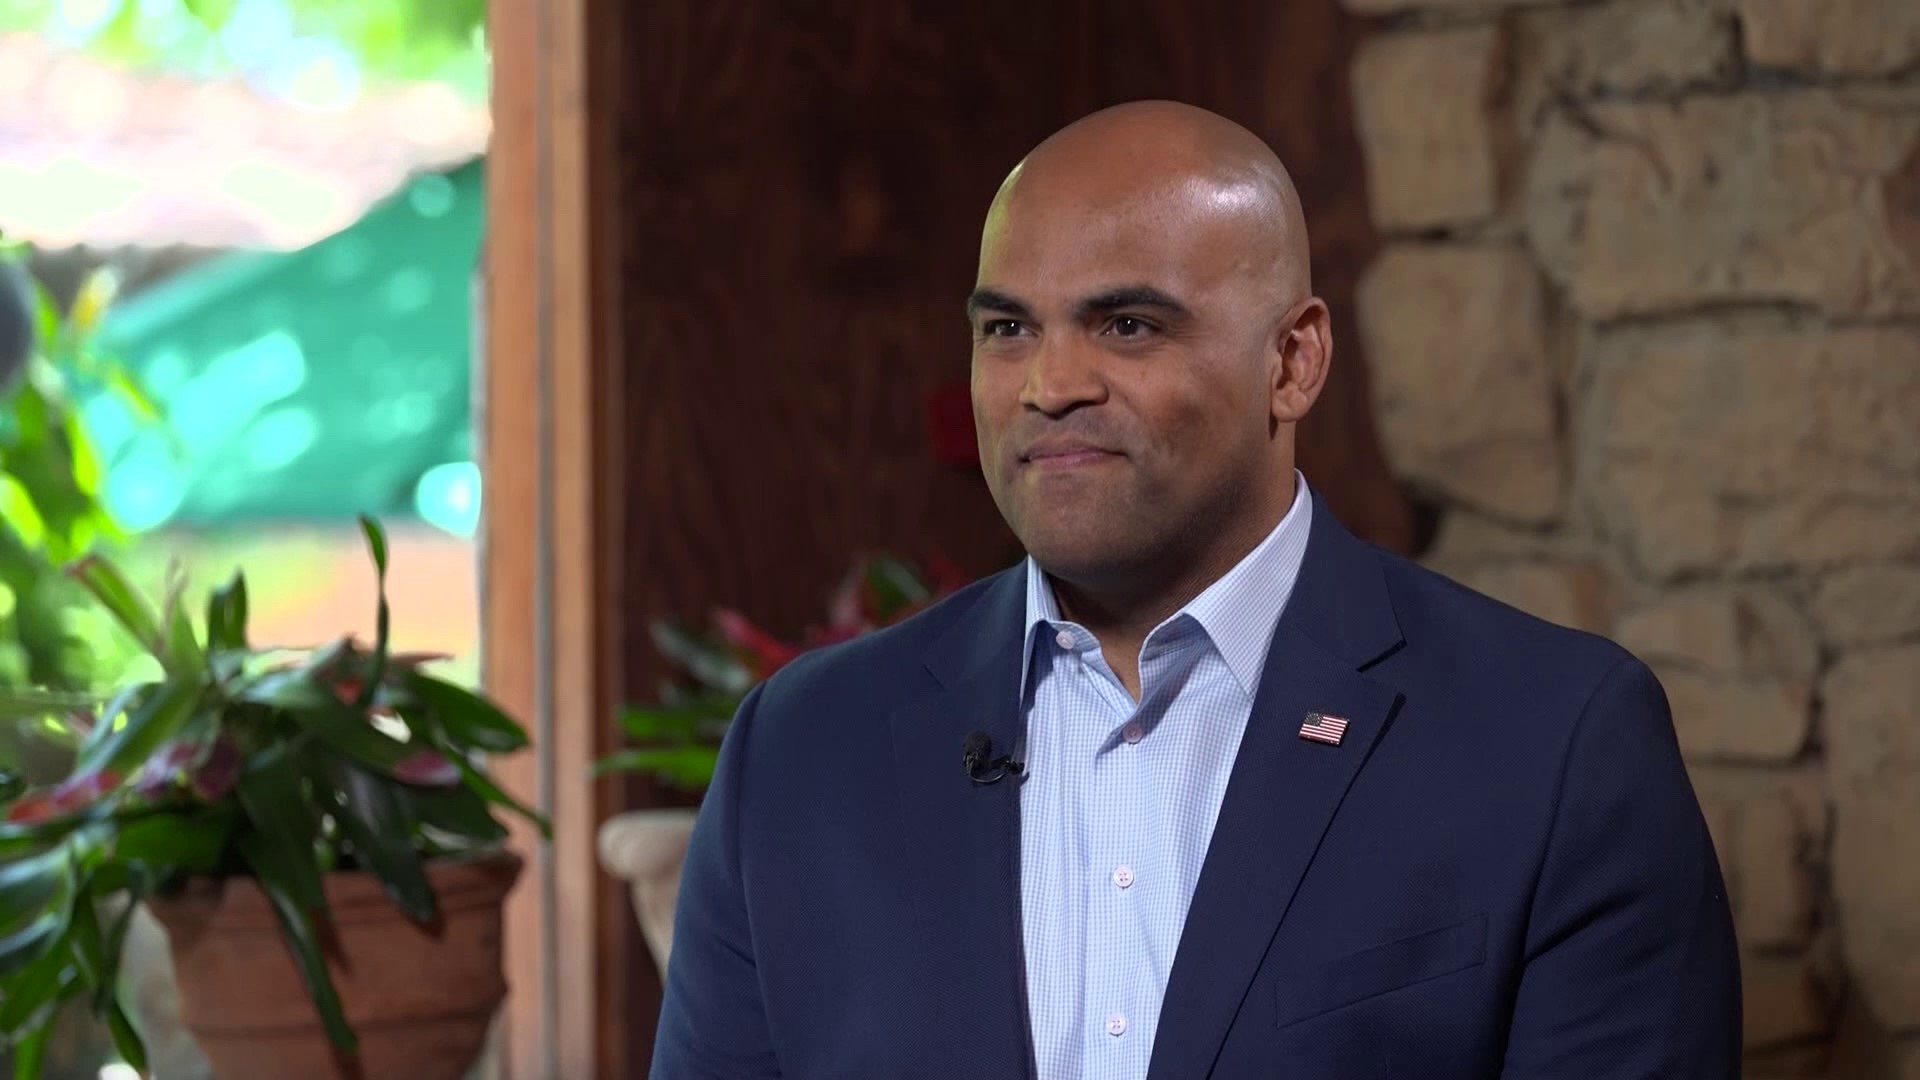 Congressman Colin Allred is one week into his statewide listening tour as part of his campaign for U.S. Senate.